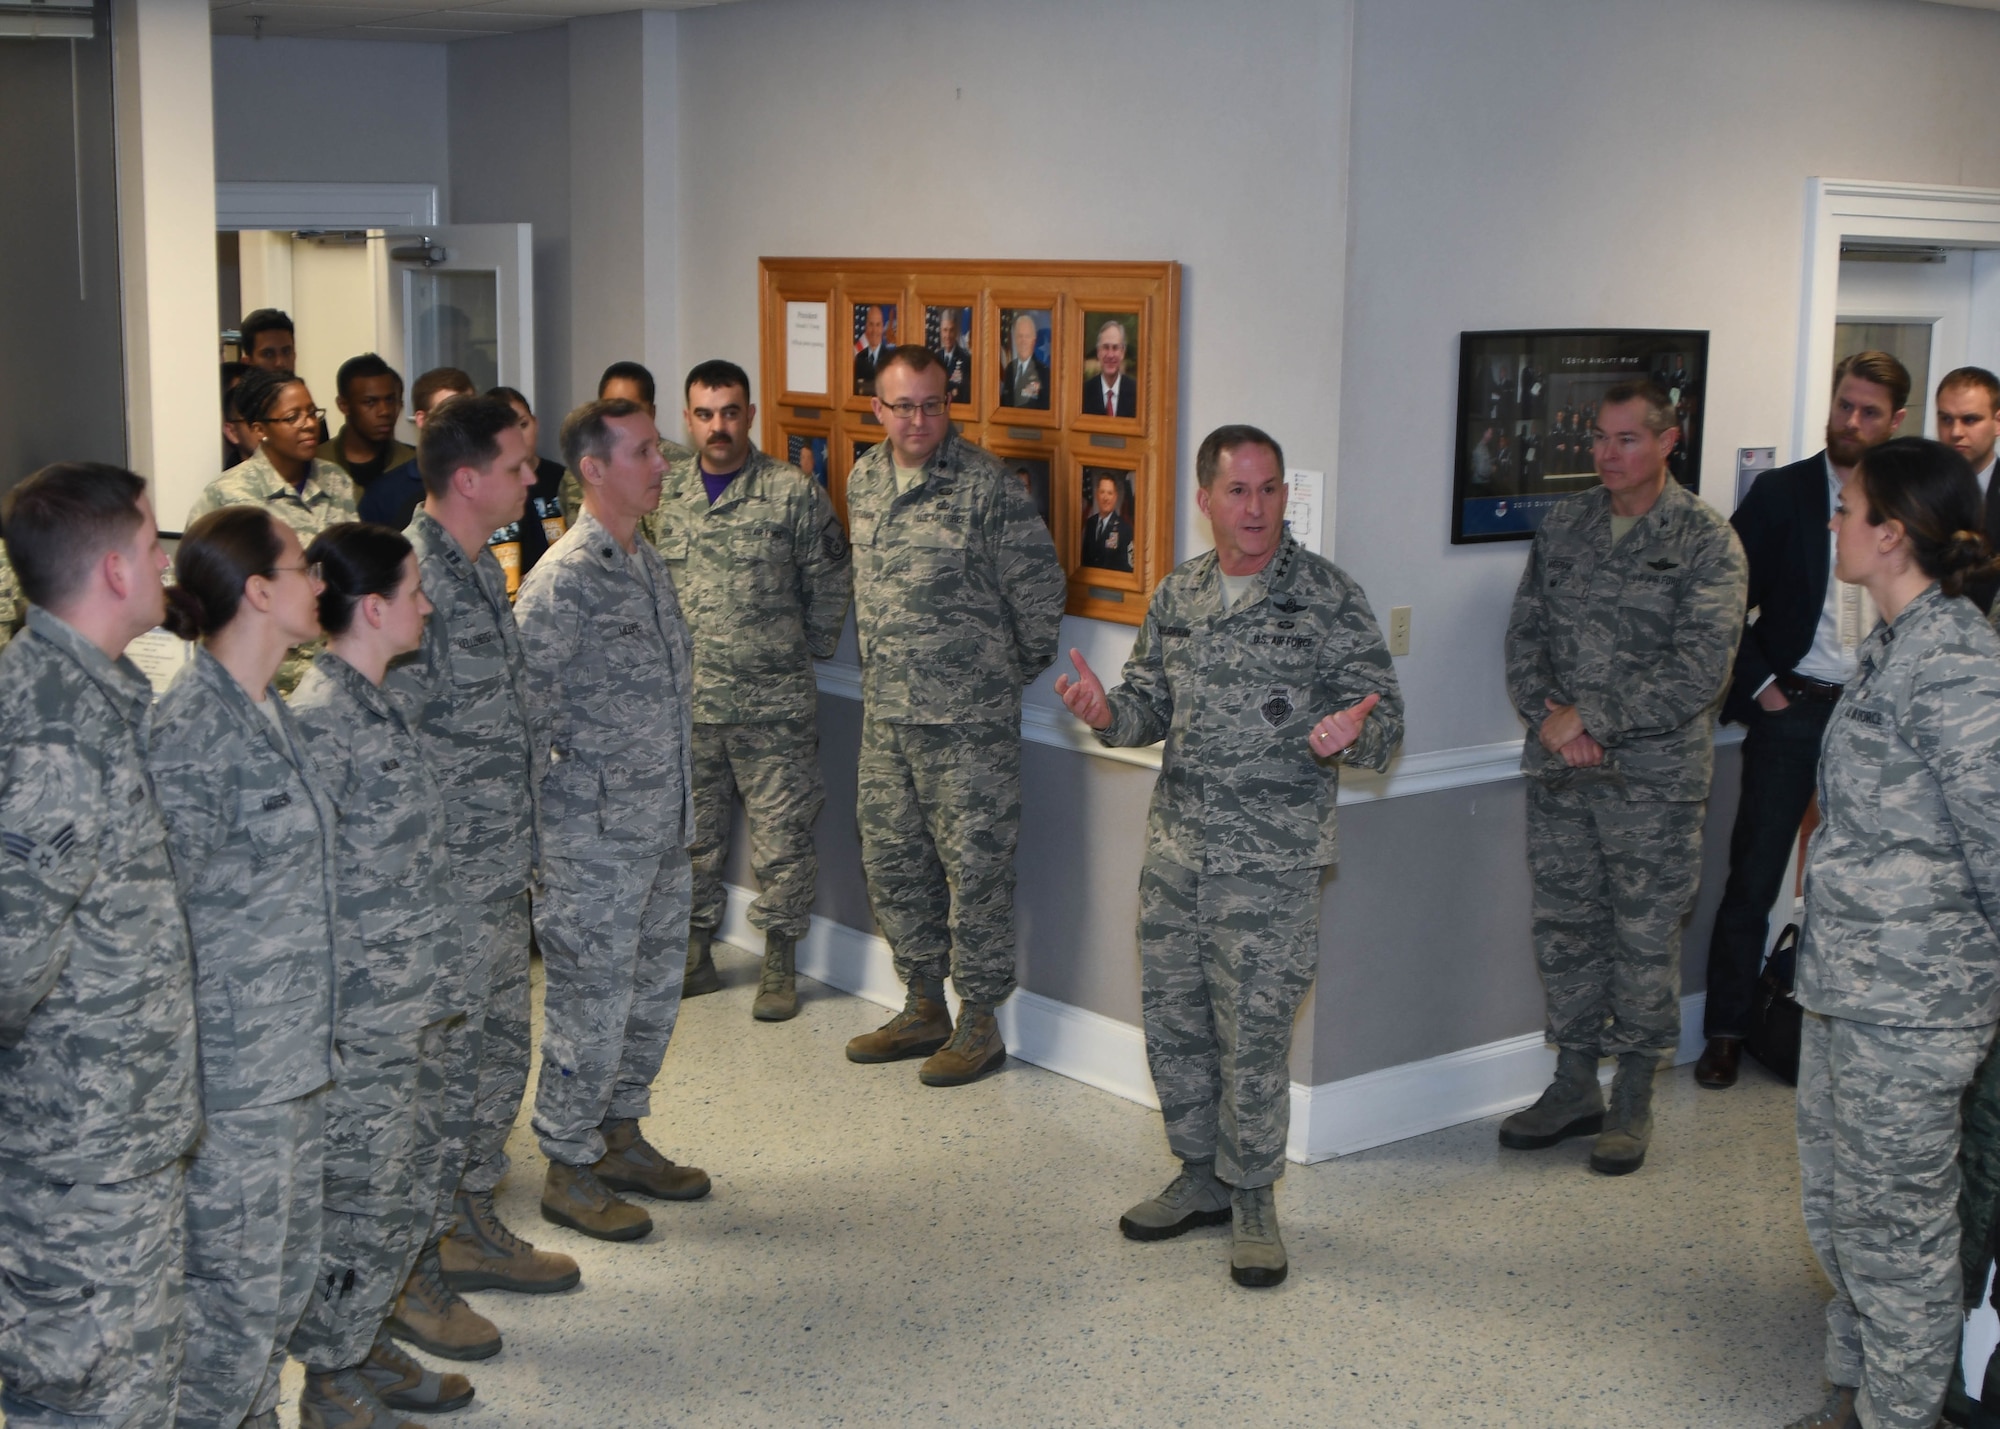 Air Force Chief of Staff Gen. David L. Goldfein speaks to the Airmen of the 136th Airlift Wing, Texas Air National Guard, during his visit to the wing at Naval Air Station Fort Worth Joint Reserve Base, Texas, Jan. 29, 2017. Goldfein addressed the wing about global operations and where the Air Force is going as a whole. (Air National Guard photo by Senior Airman De’Jon Williams)